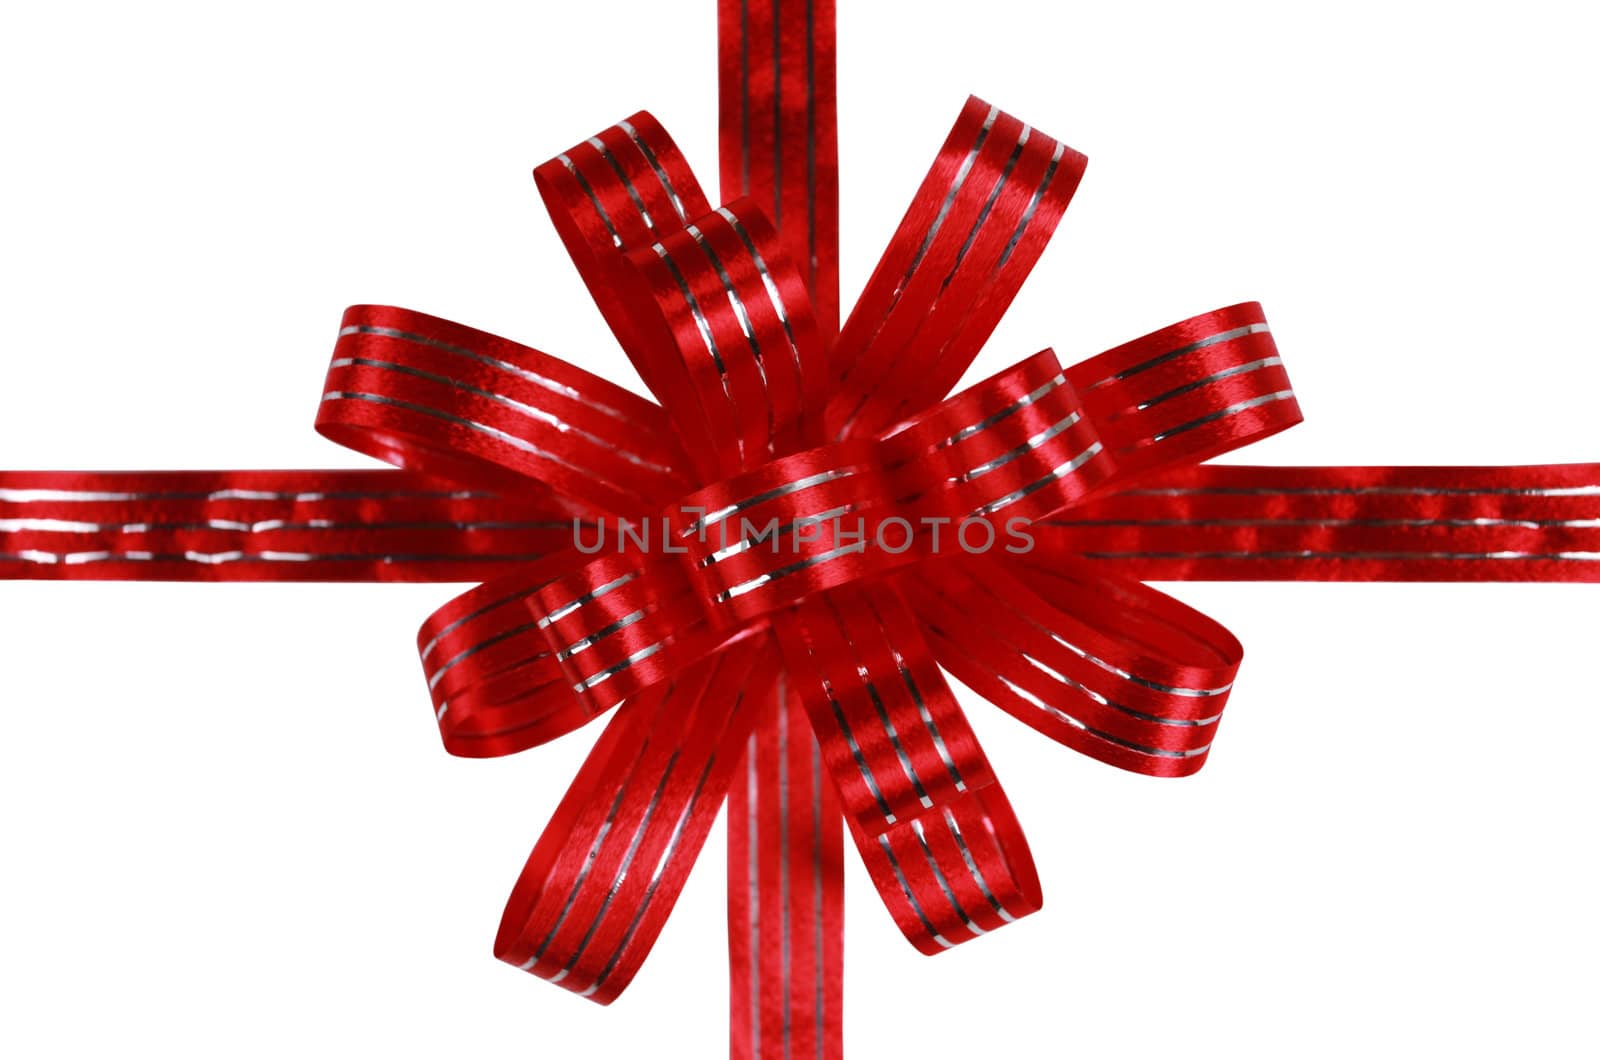 Red bow and ribbons isolated over white, ready to overlay a gift box design